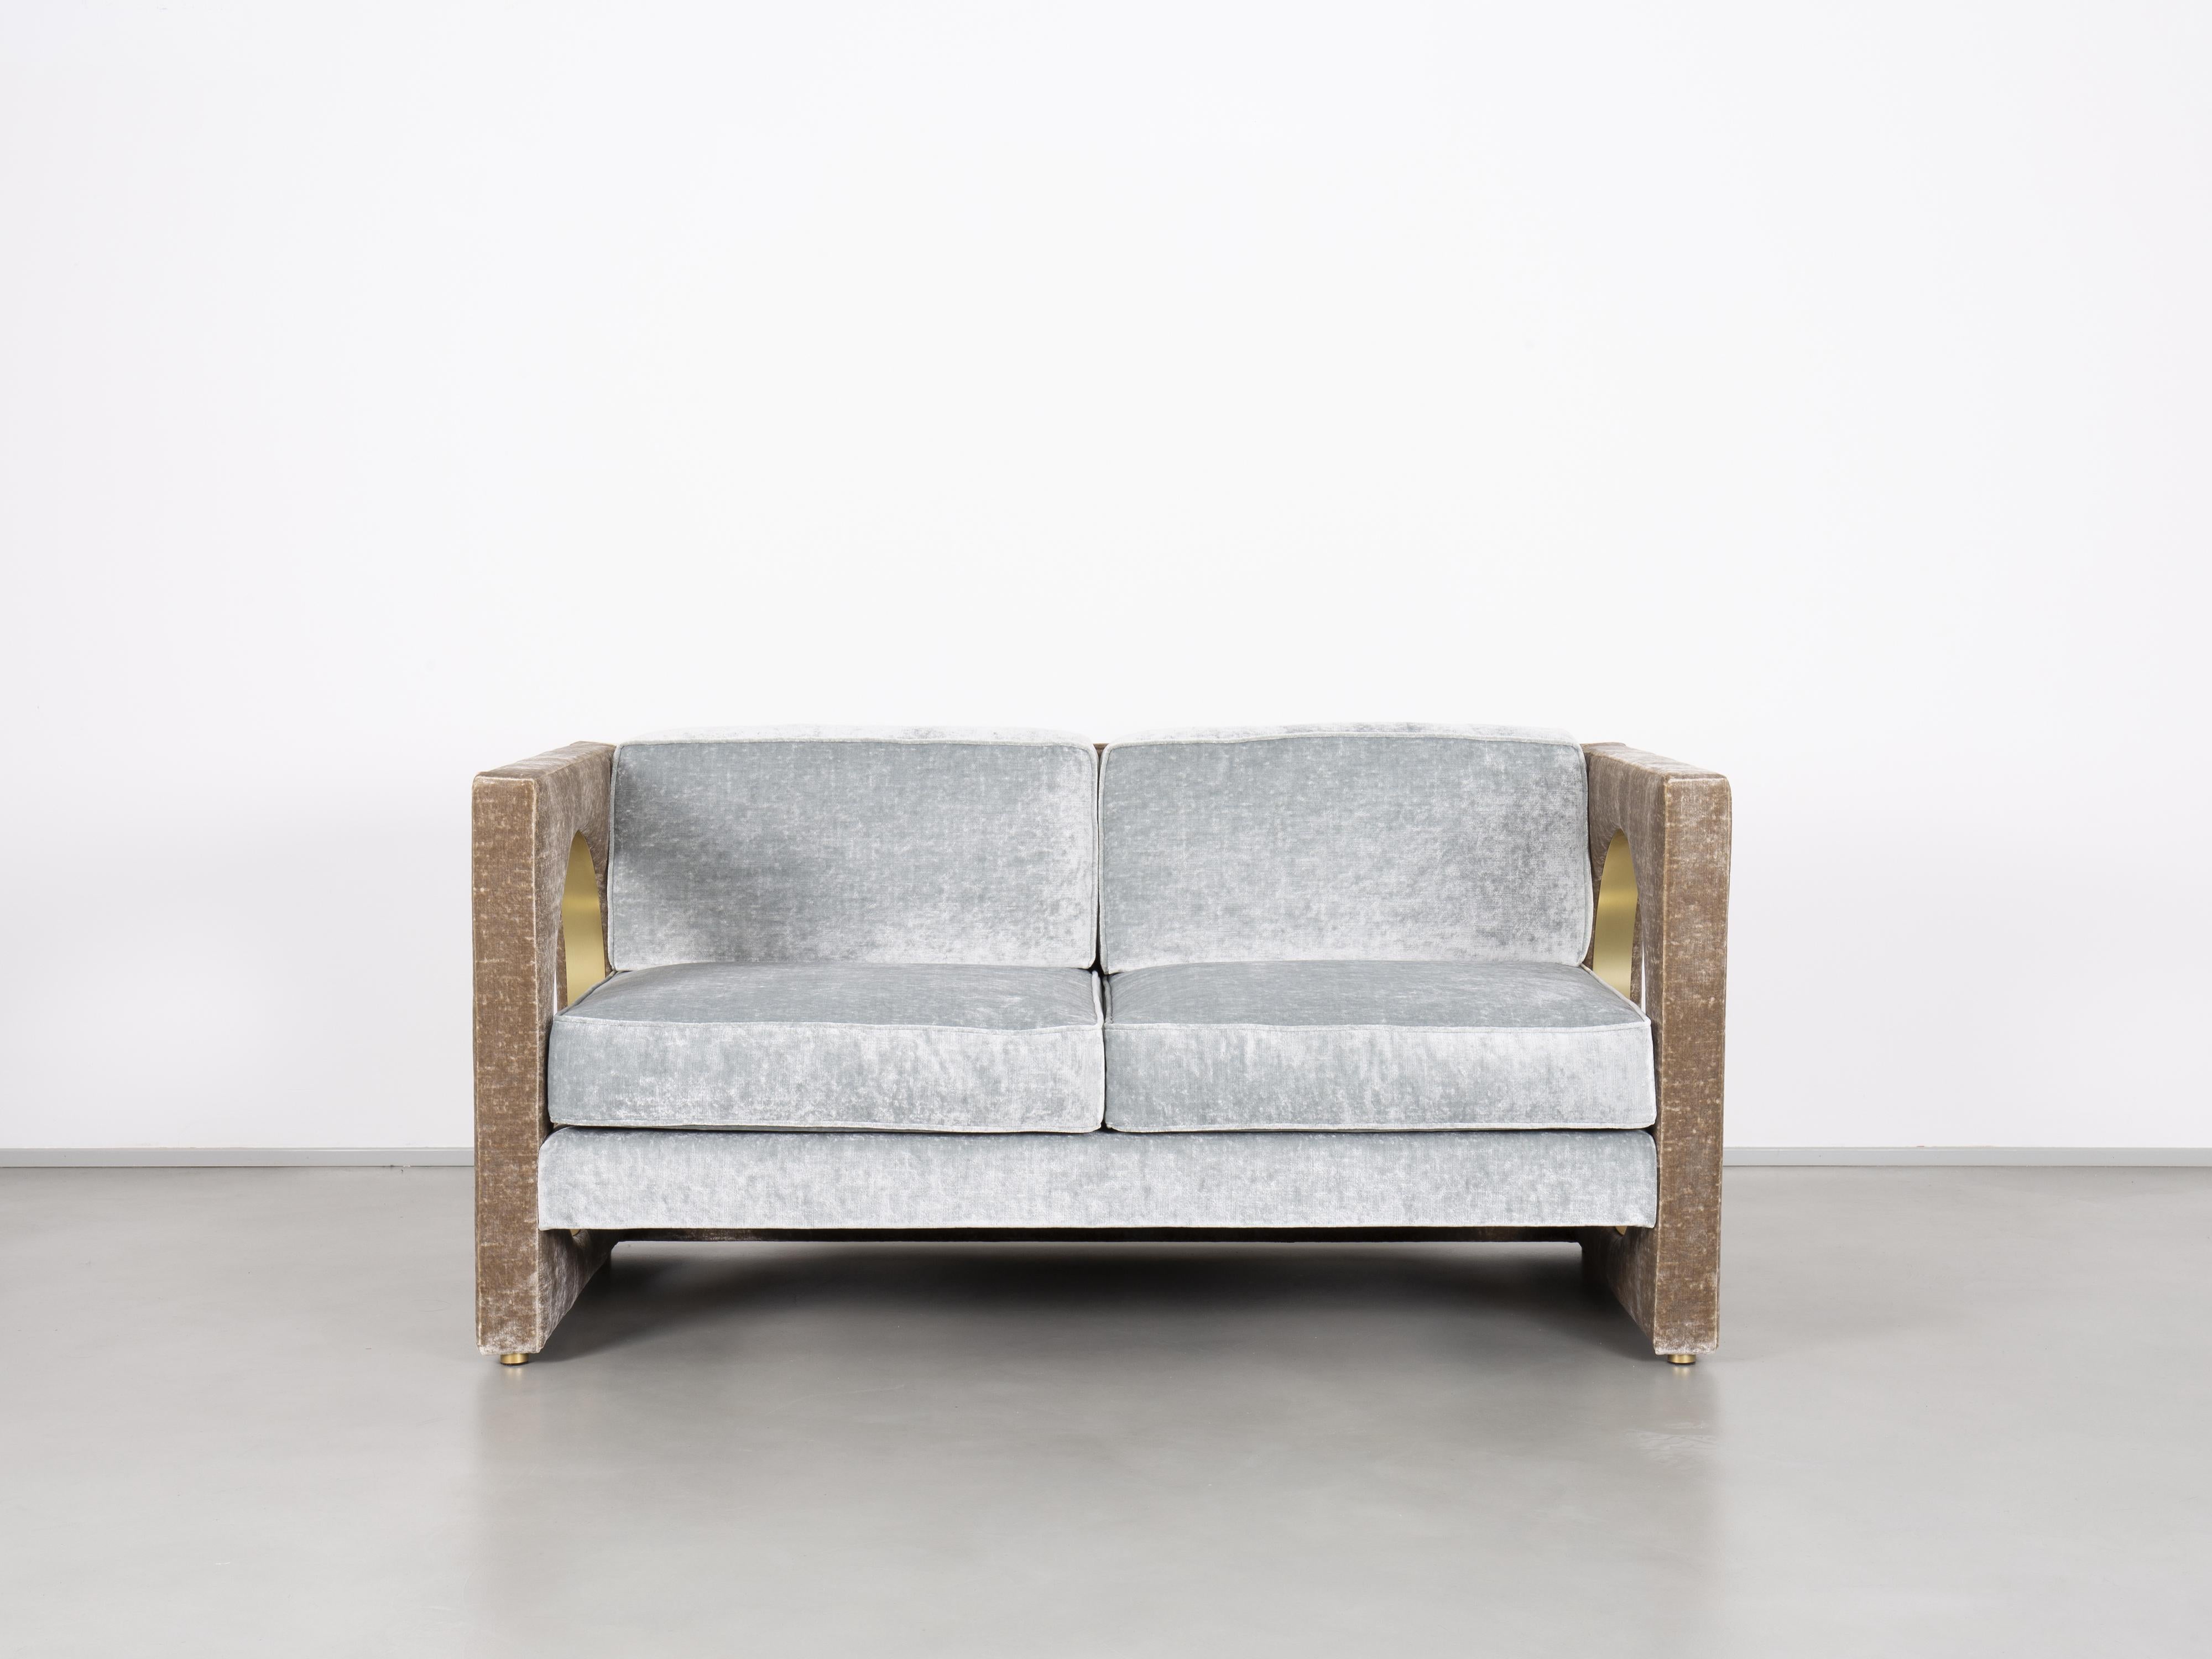 Italian See Through 152 Sofa by Pierre Gonalons Misia Fabric Paradisoterrestre Edition For Sale